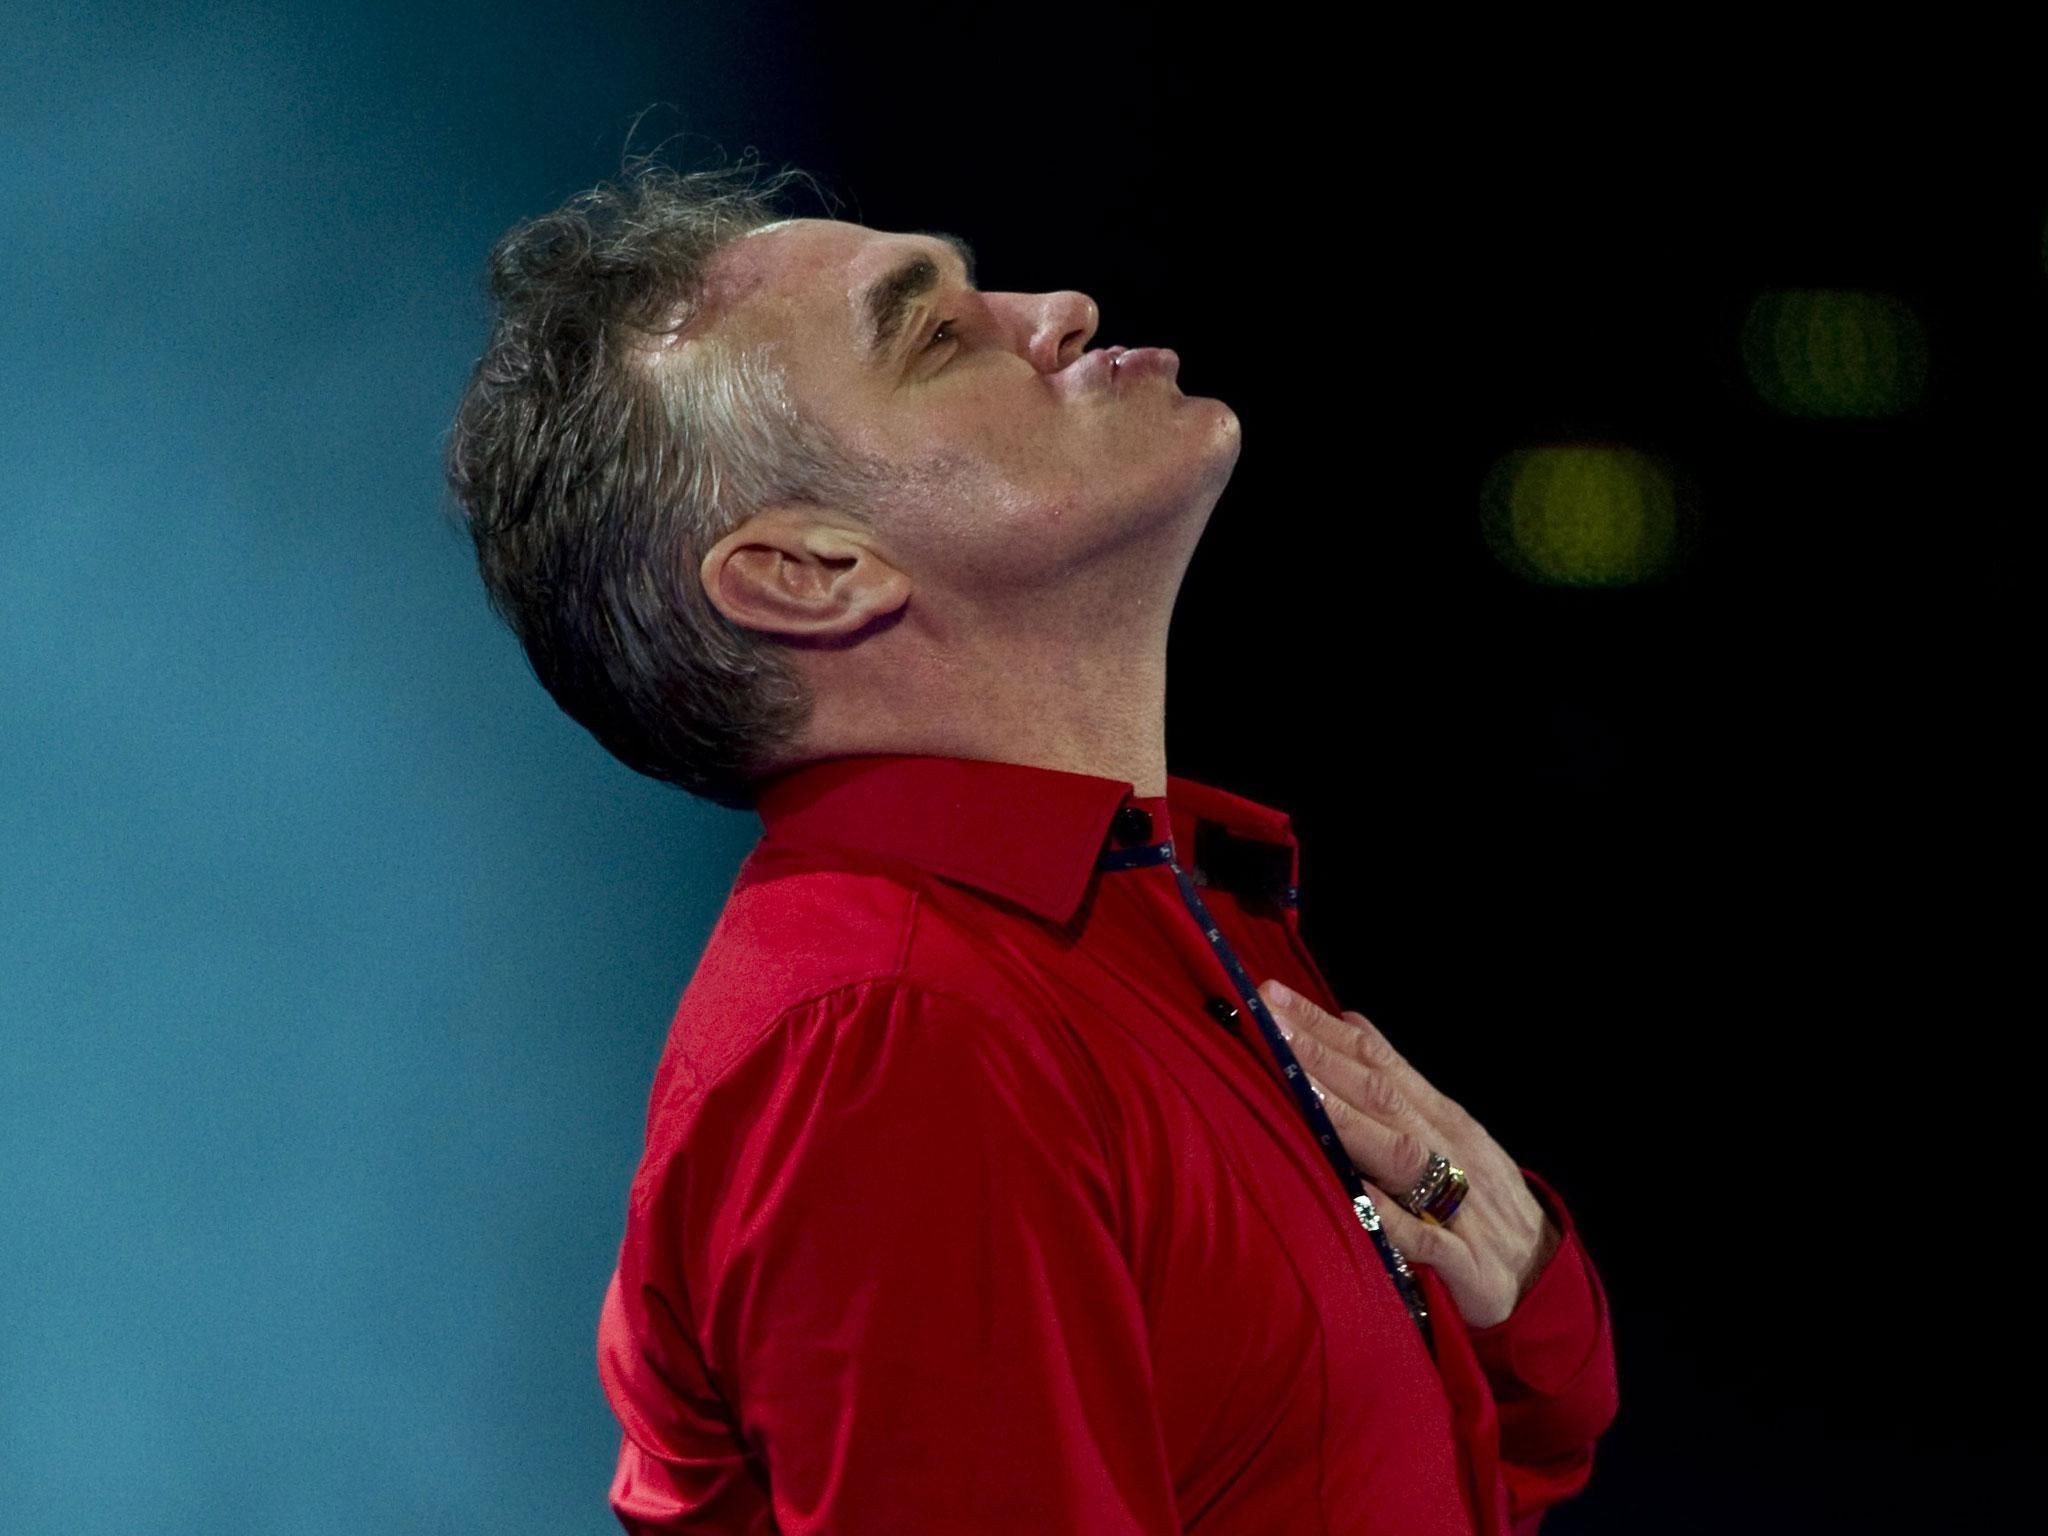 Morrissey refuses to perform in venues that do not go meat-free while he is on stage